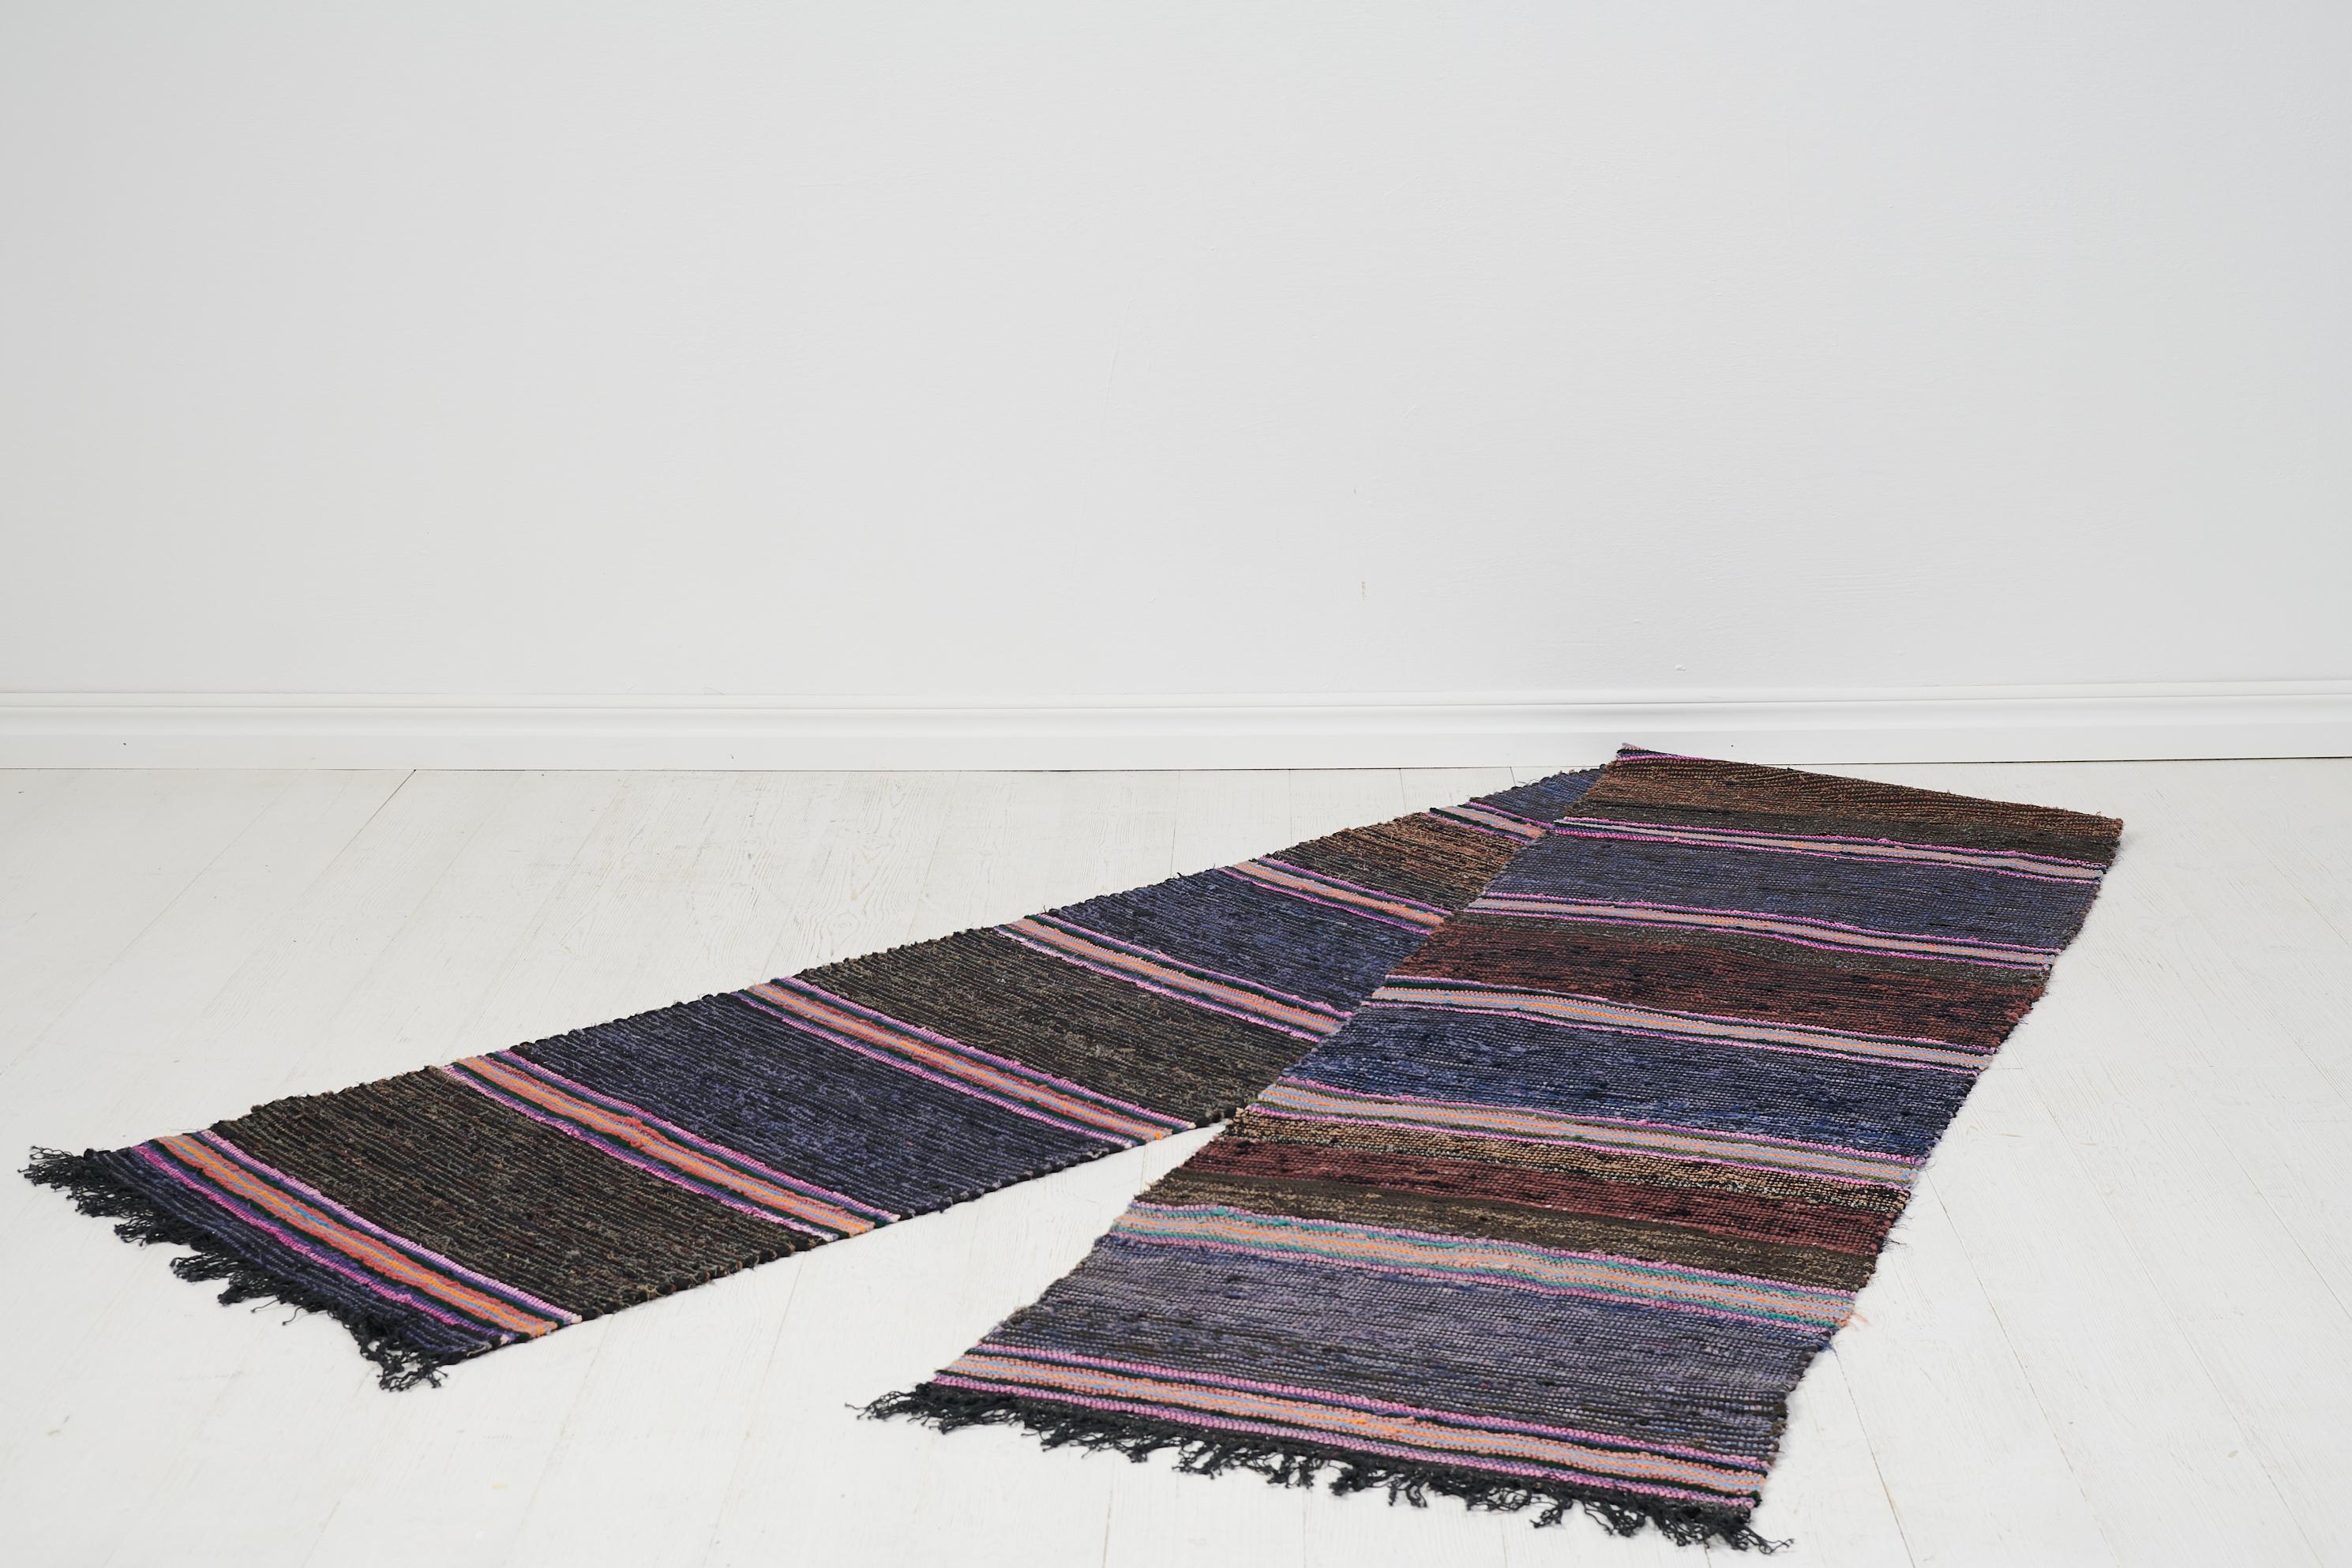 Antique Swedish hand-woven rug in folk art from the turn of the century 1800 to 1900s. The rug is from Delsbo in Hälsingland in Sweden and has been on the same farm since it was made. These rugs, also known as rag rugs, are made from multiple